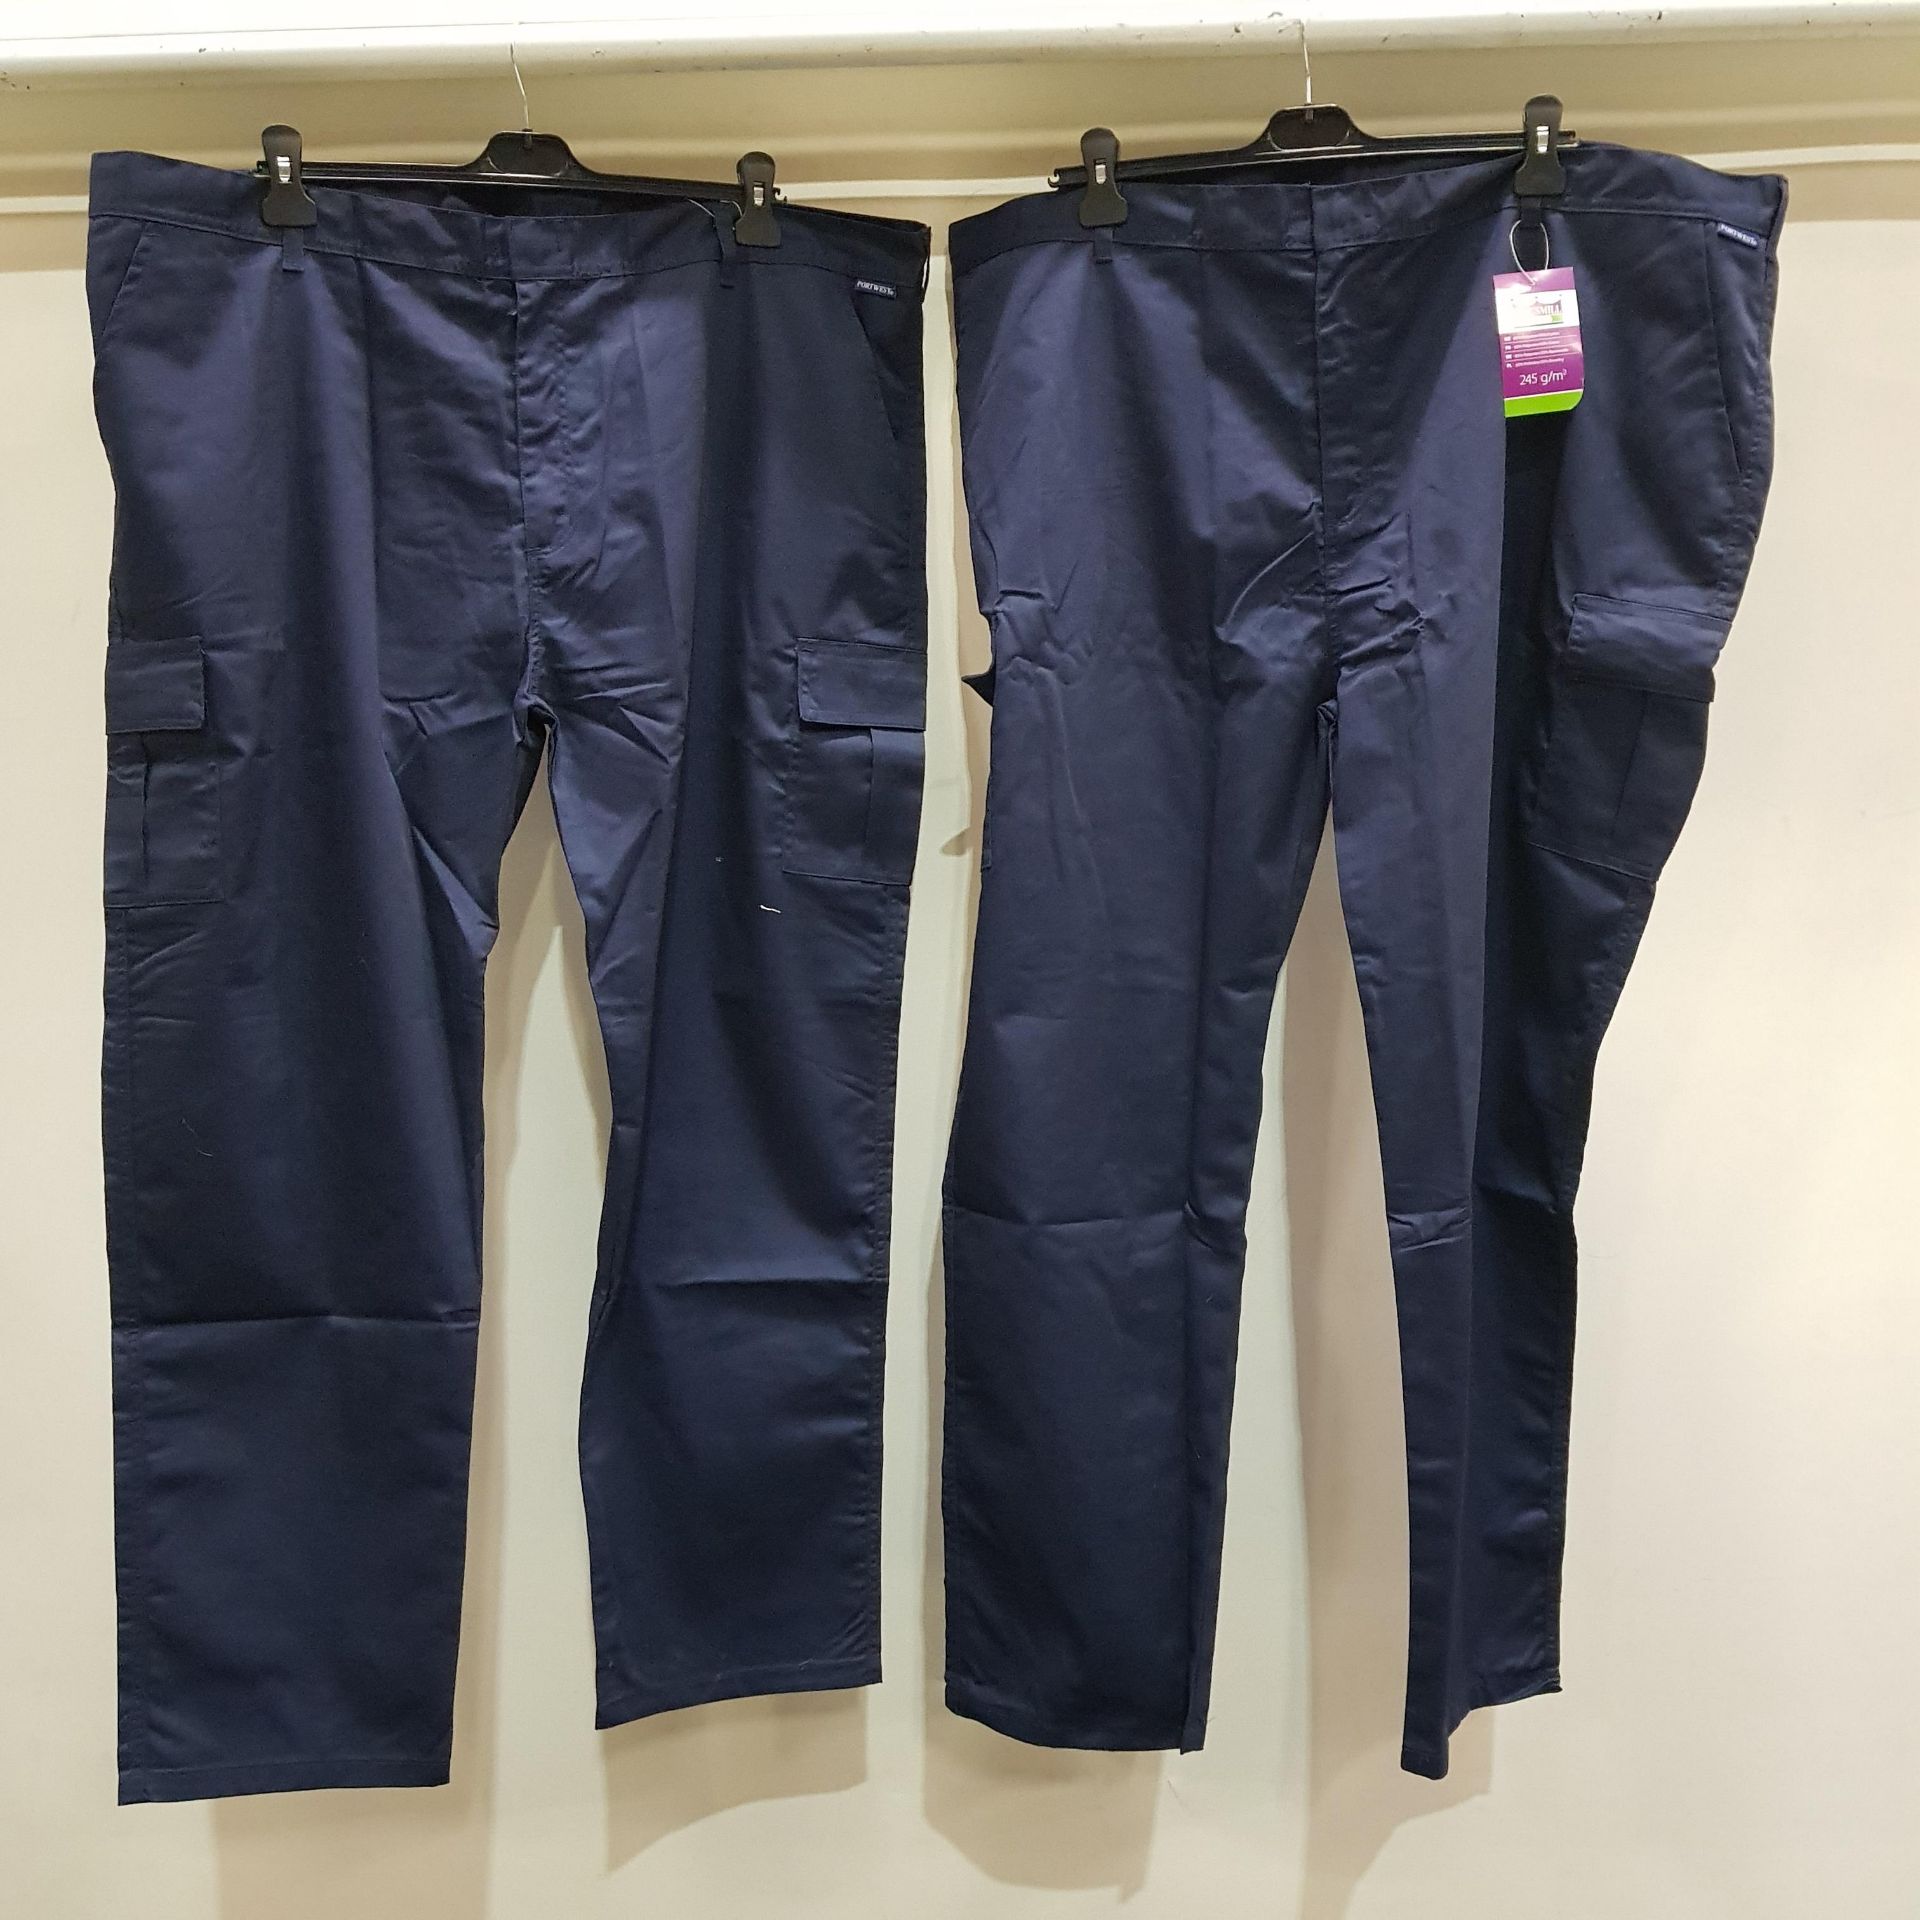 50 X BRAND NEW PORTWEST COMBAT TROUSERS IN NAVY BLUE SIZES 46 , 50 IN ONE BIG BOX